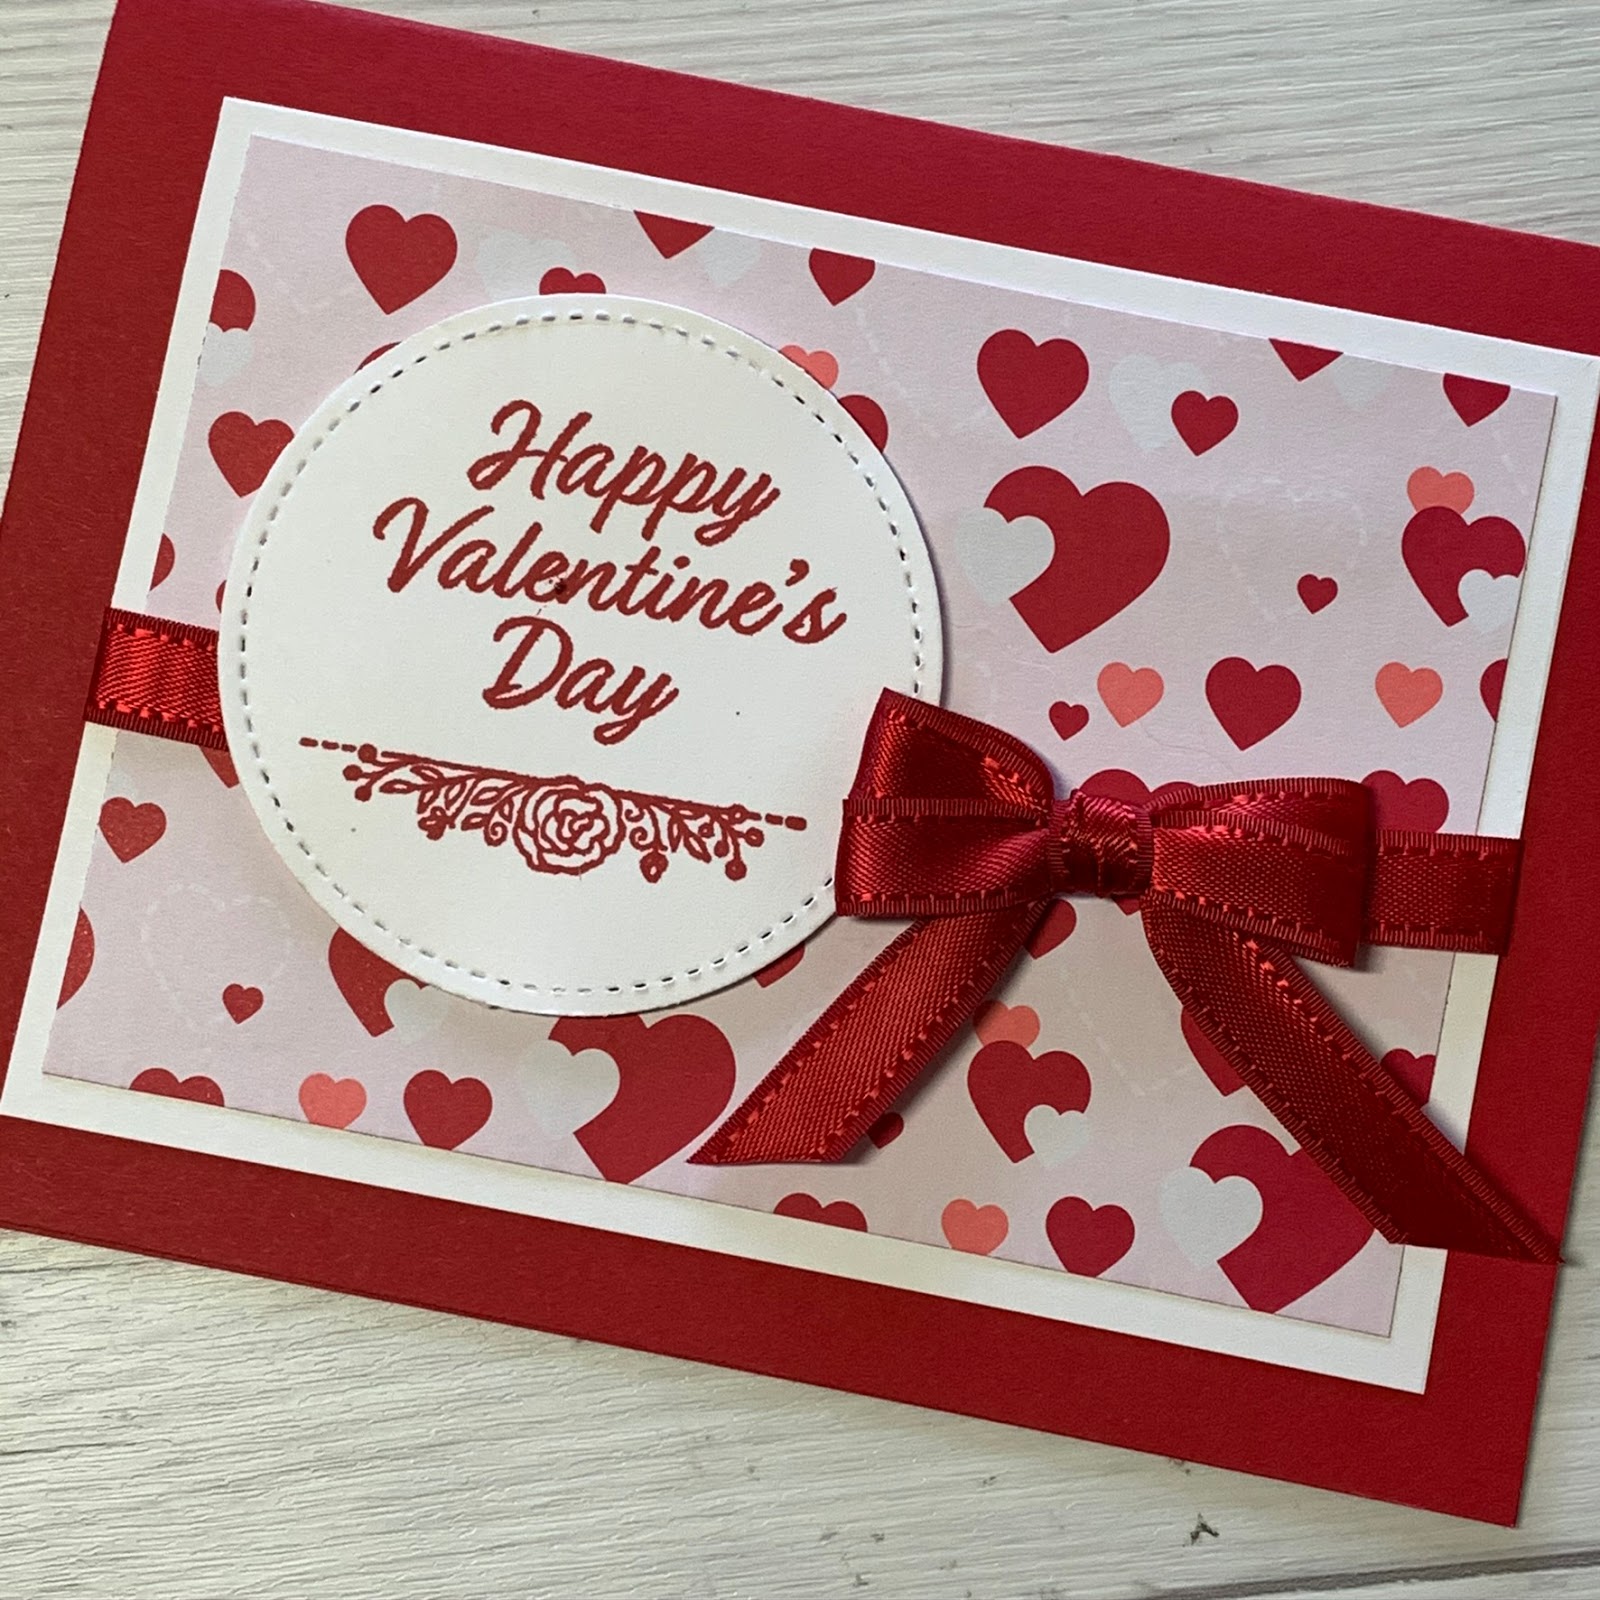 create-a-fast-valentine-card-using-meant-to-be-stamp-and-stitched